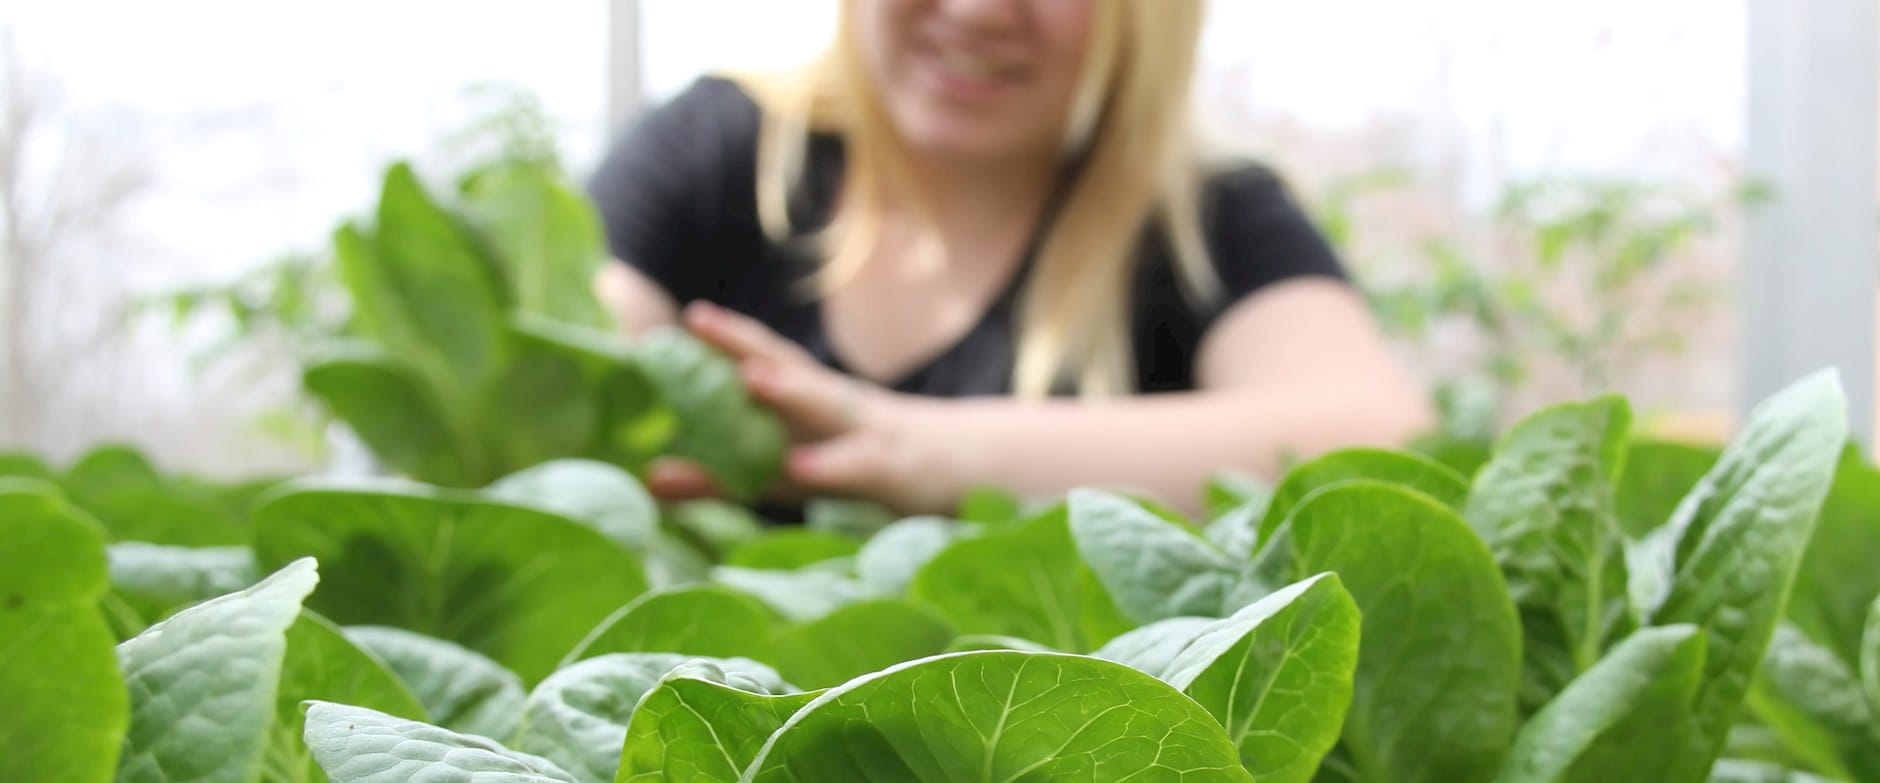 Blonde woman gardening leaves of cabbage